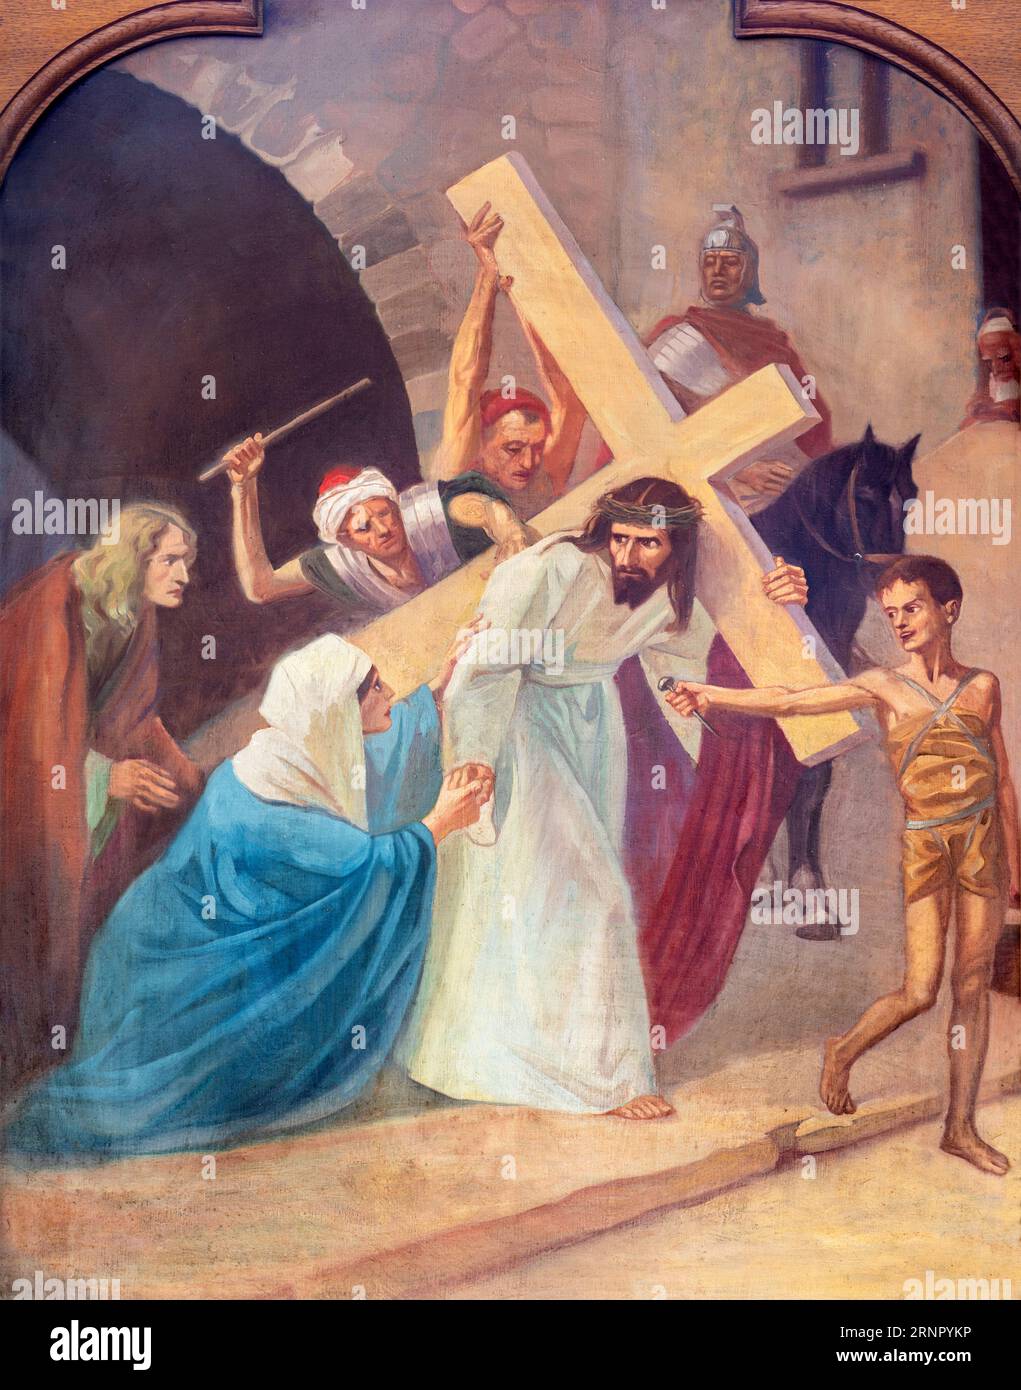 SEBECHLEBY, SLOVAKIA - OKTOBERT 8, 2022: The painting  Jesus meet his mother Mary as part of Cross way stations in St. Michael parish church Stock Photo